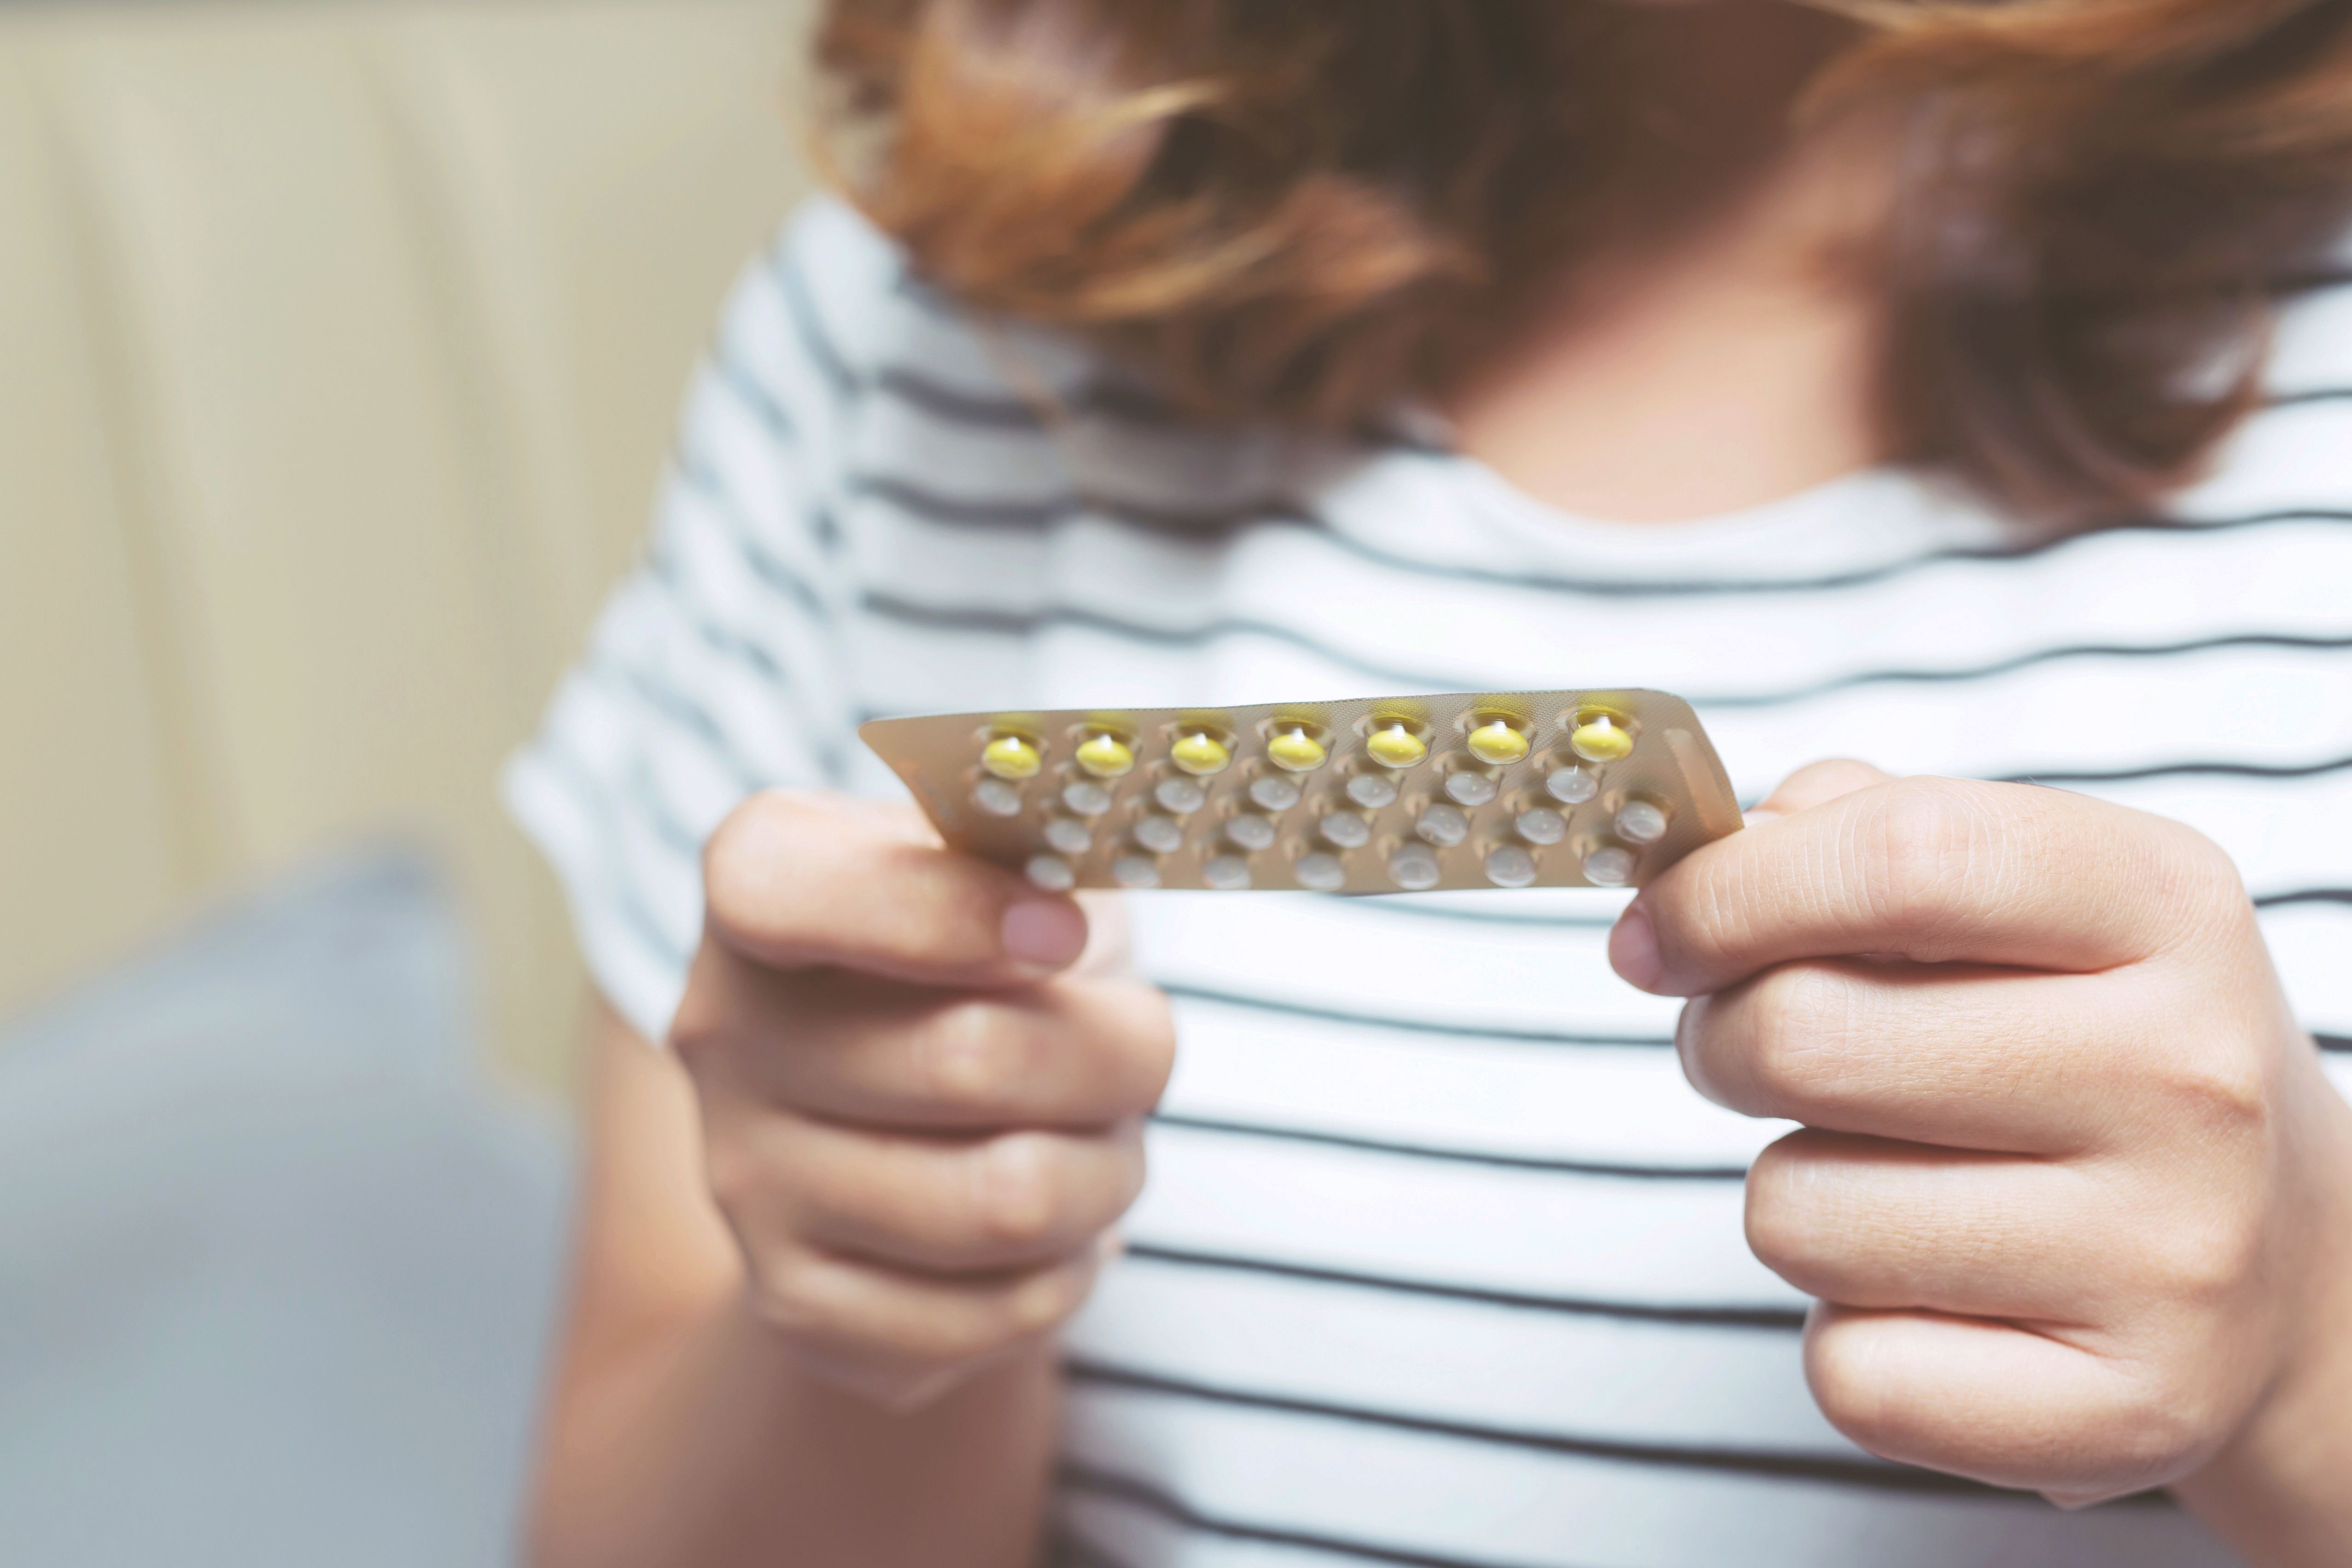 woman hands opening birth control pills in hand on the bed in the bedroom eating contraceptive pill